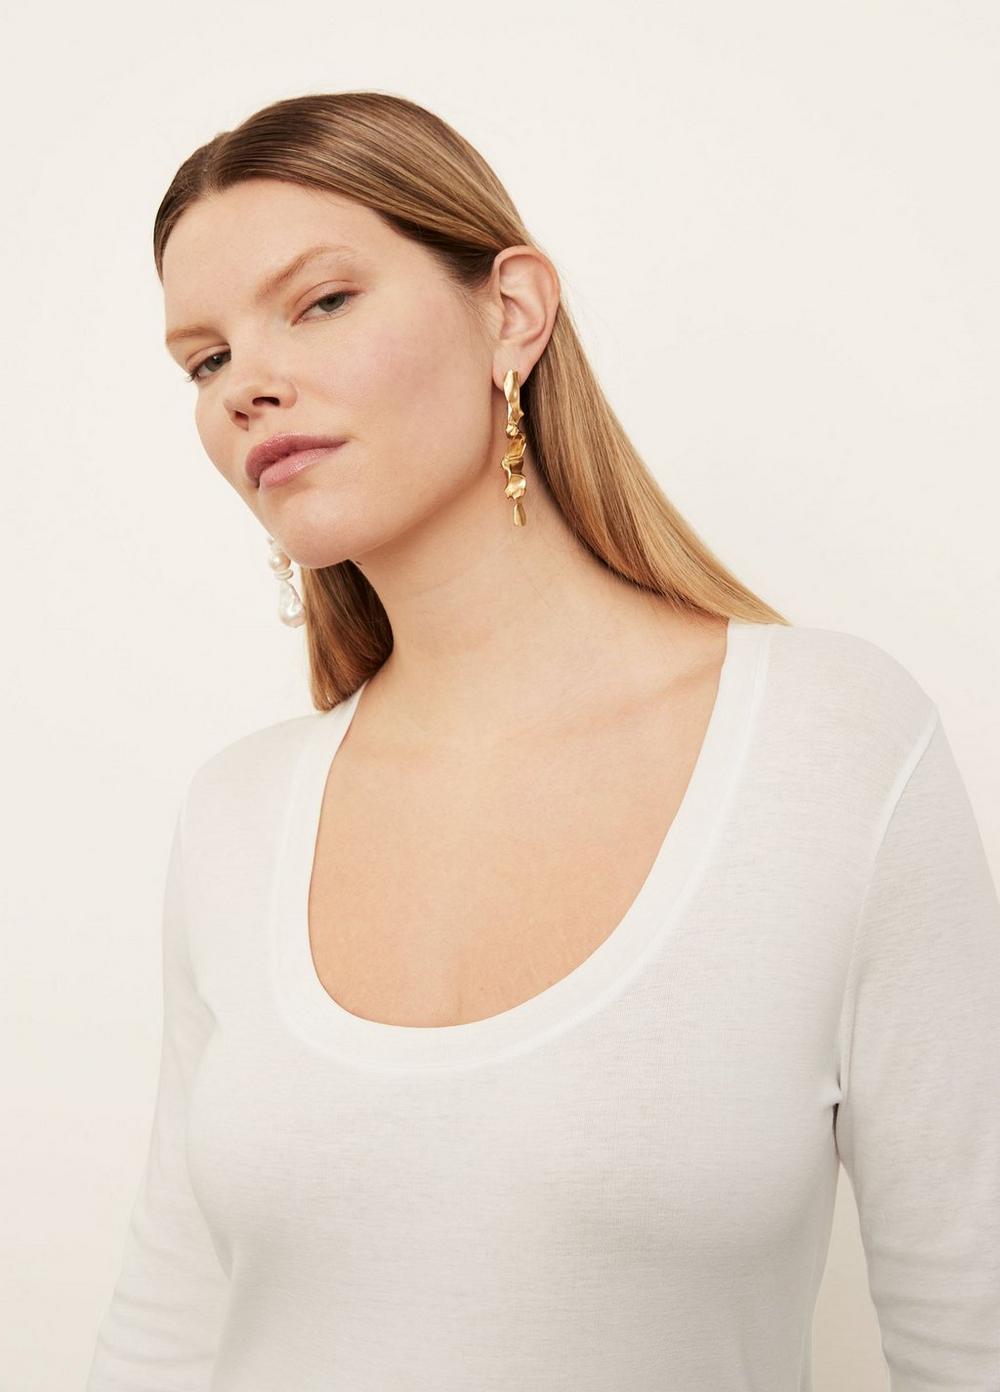 Scoop Neck Long Sleeve T-Shirt in Extended Sizes